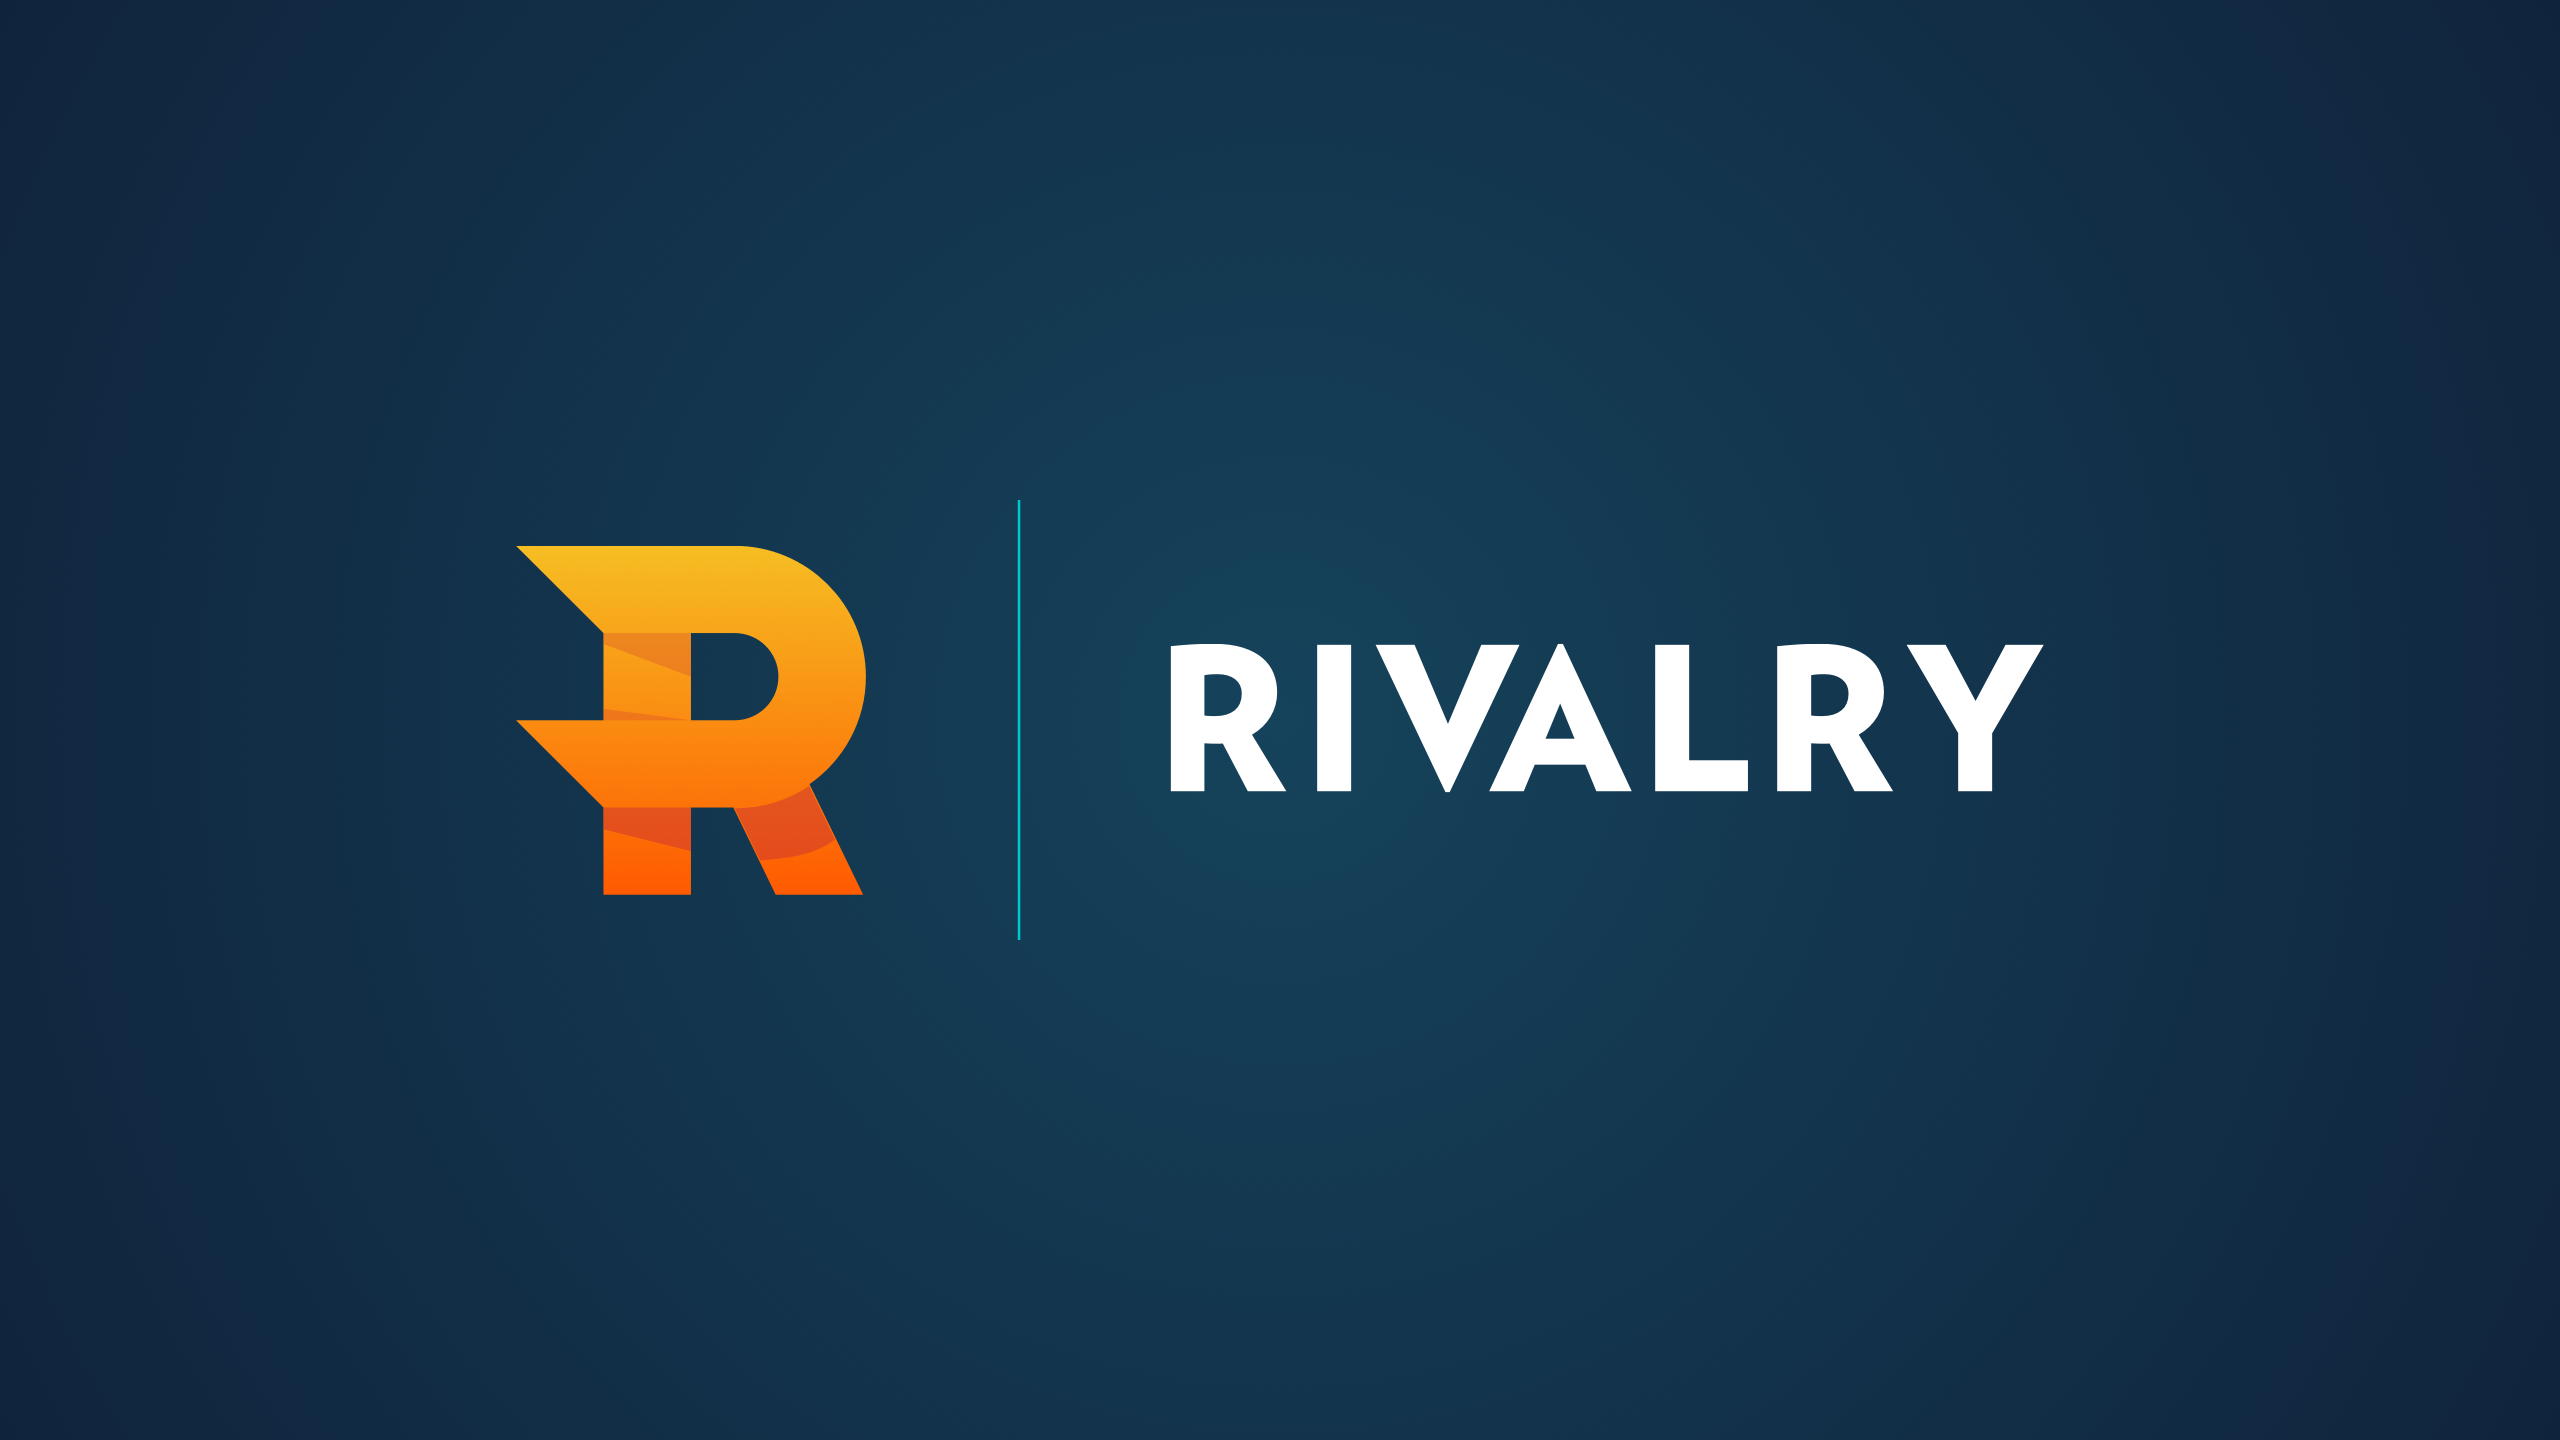 Rivalry: Review & Análise 2021